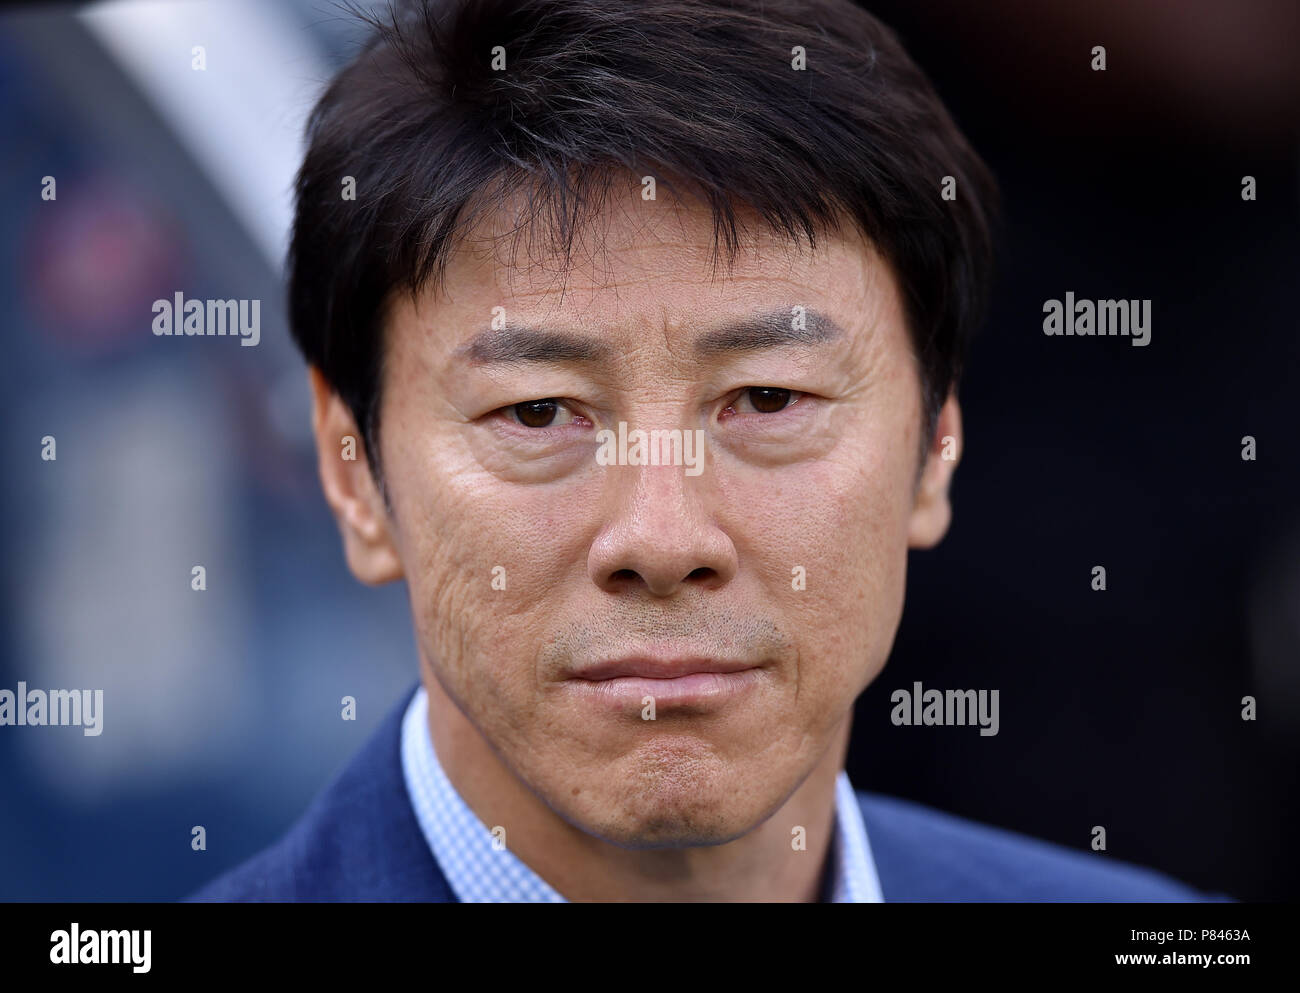 NIZHNIY NOVGOROD, RUSSIA - JUNE 18: Shin Tae-yong, Manager of Korea Republic during the 2018 FIFA World Cup Russia group F match between Sweden and Korea Republic at Nizhniy Novgorod Stadium on June 18, 2018 in Nizhniy Novgorod, Russia. (Photo by Lukasz Laskowski/PressFocus/MB Media) Stock Photo